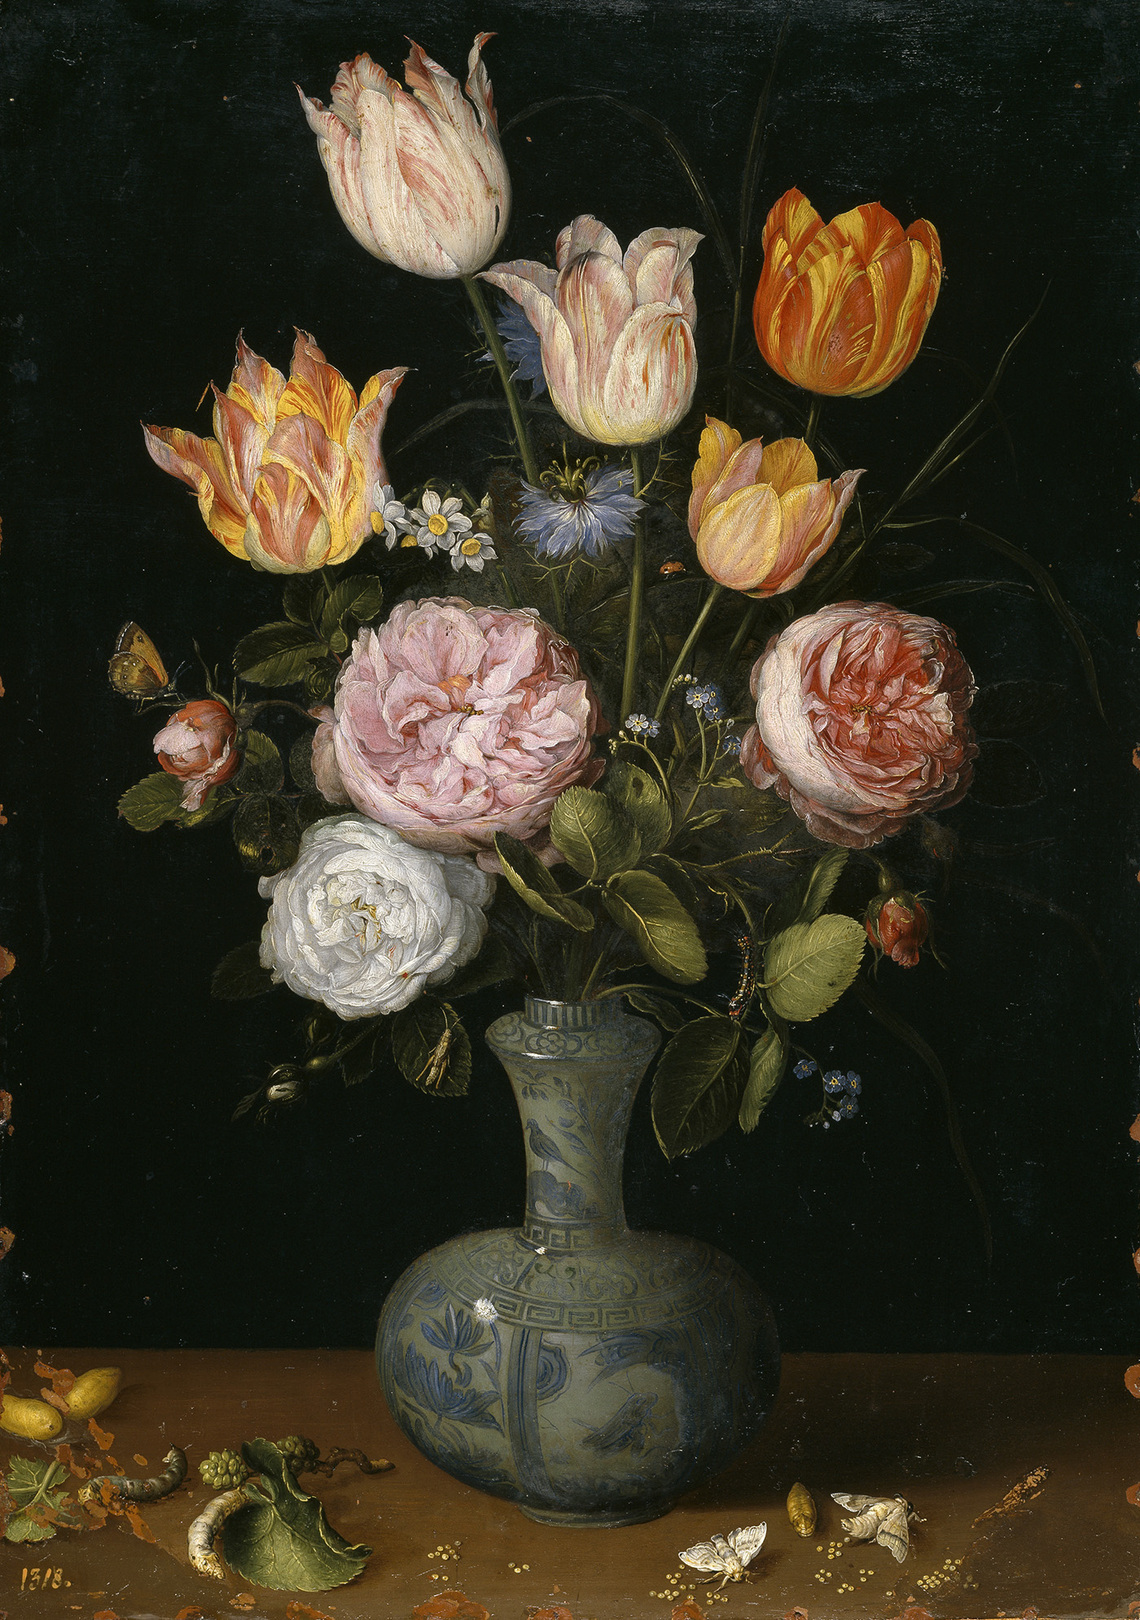 Flowers in a Painted Ceramic Vase with Moths (Madrid)